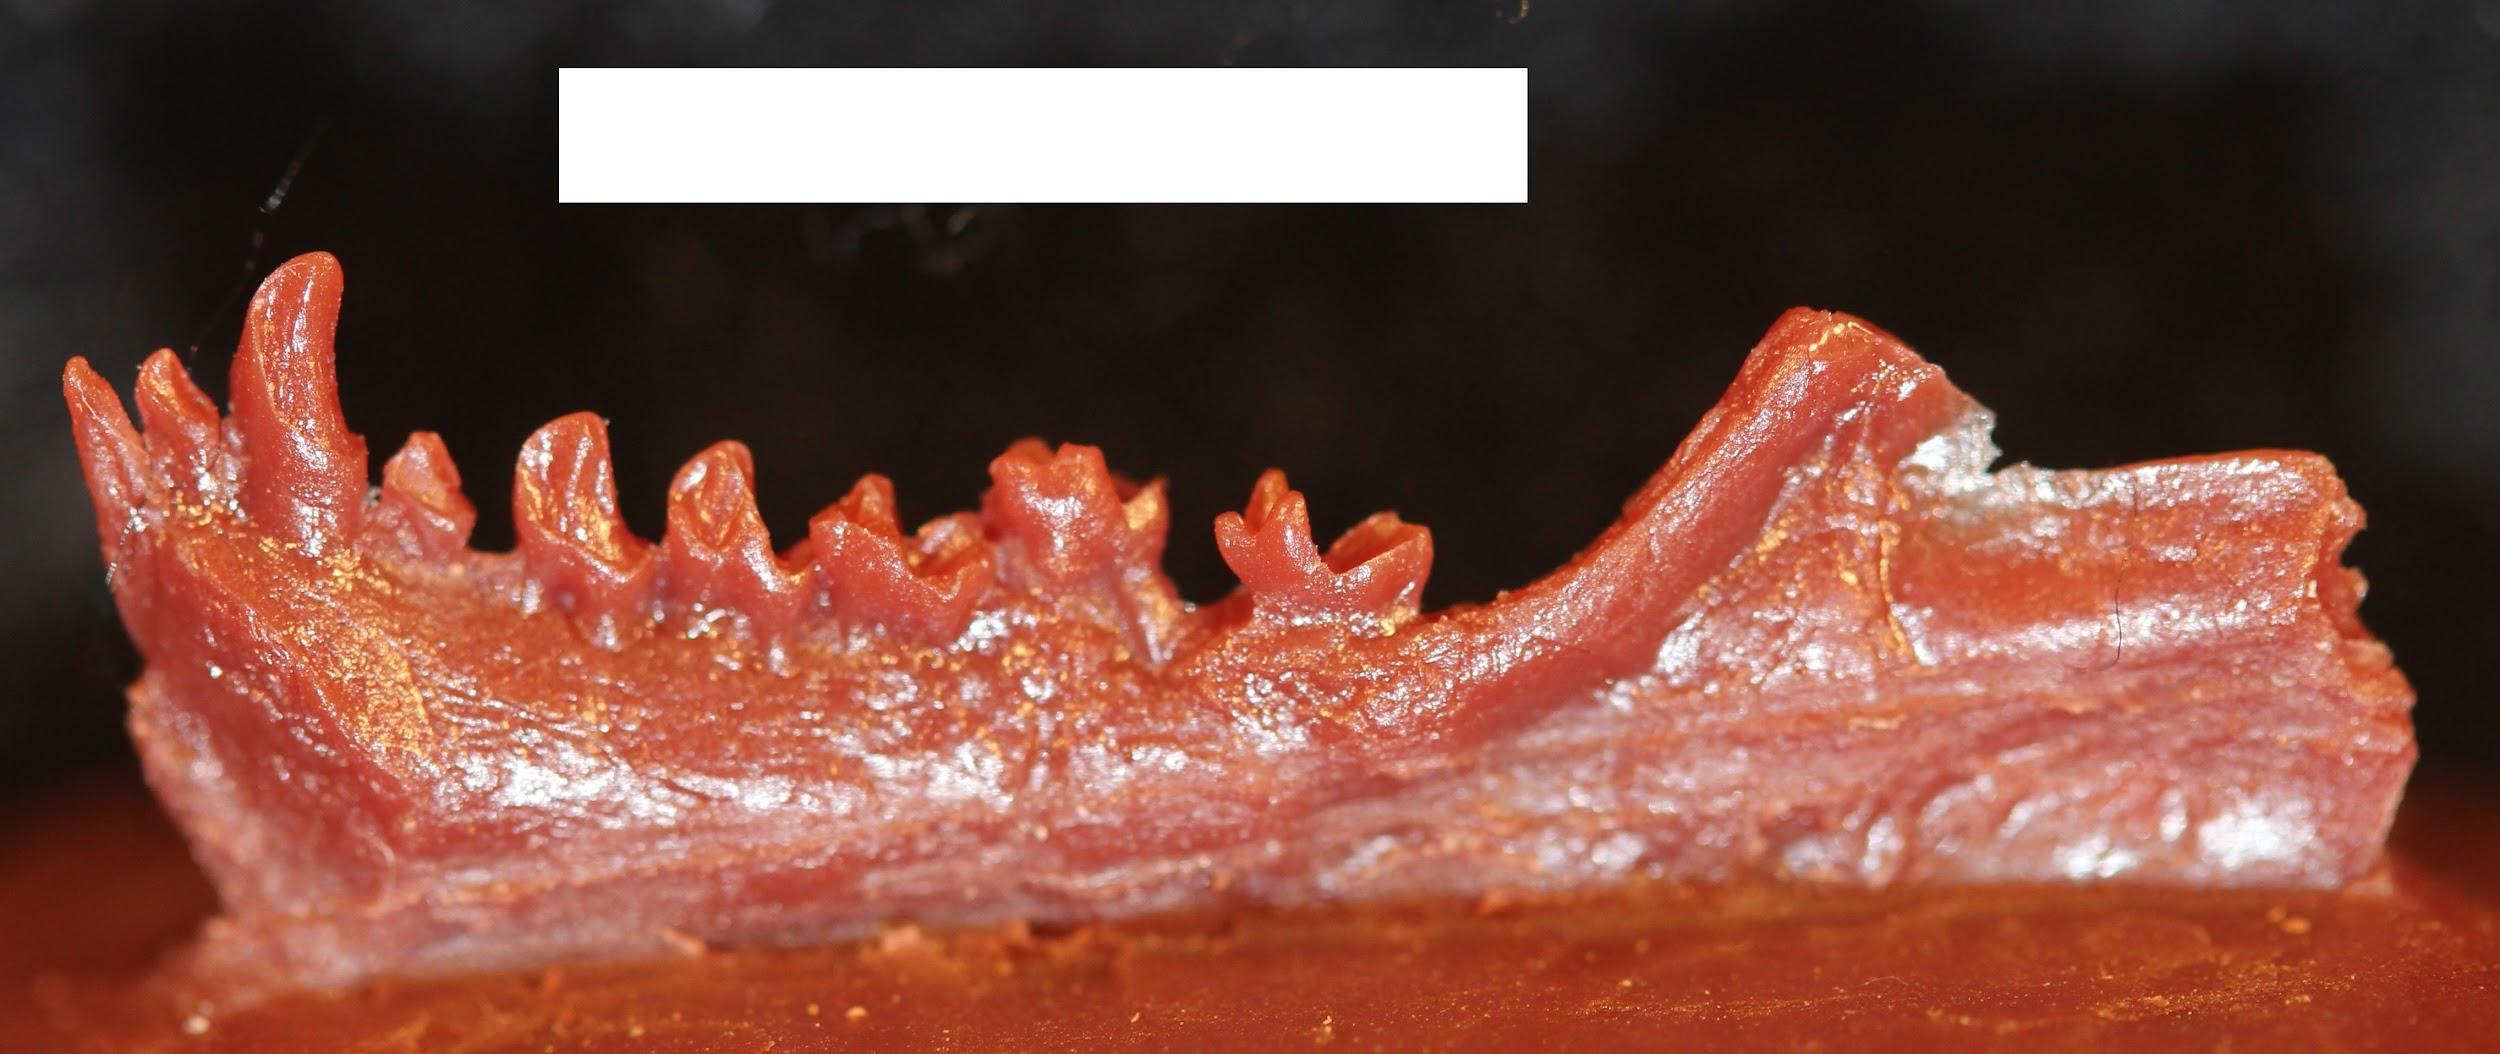 Red-colored lower jaw of an animal.